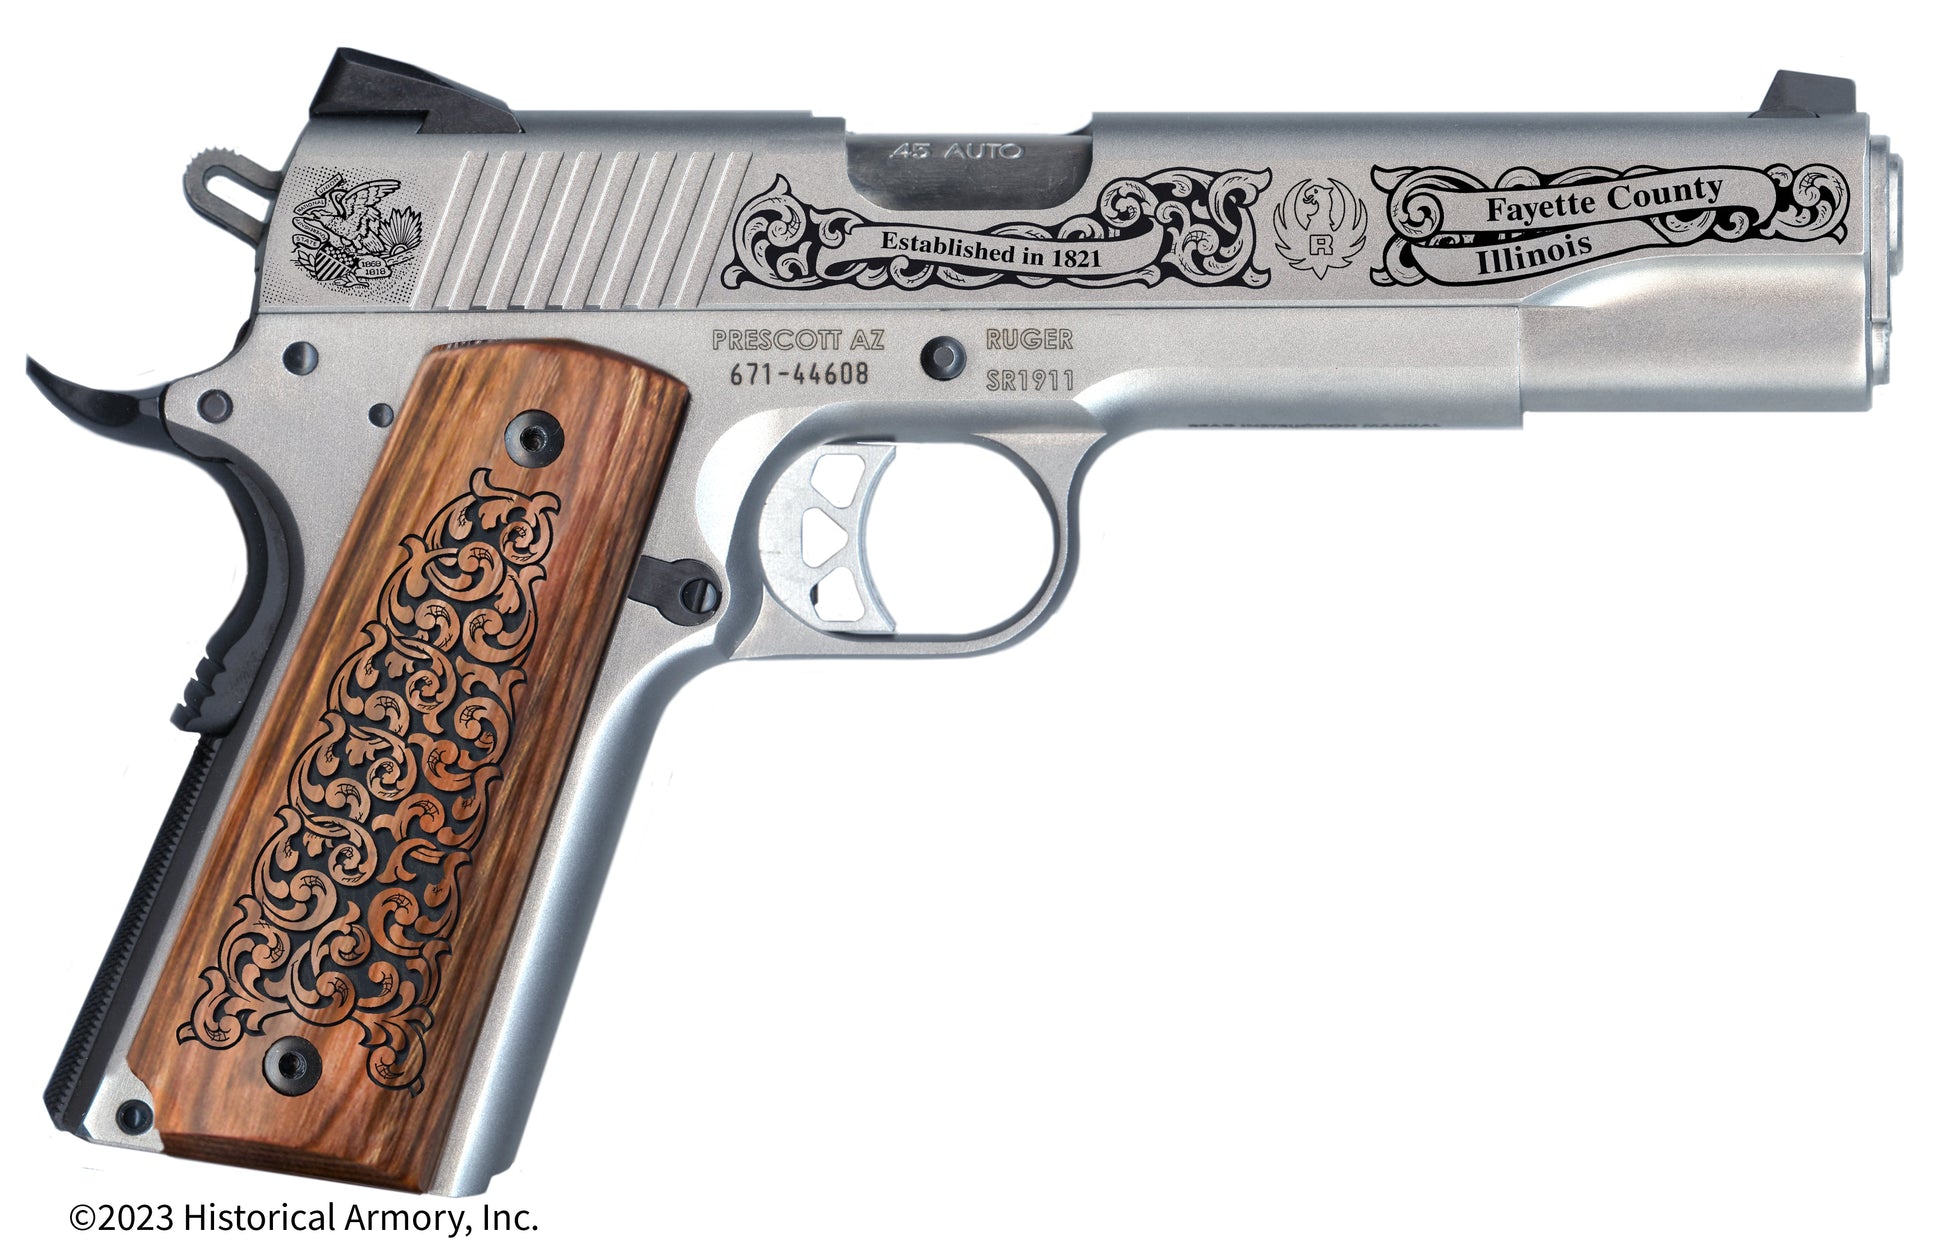 Fayette County Illinois Engraved .45 Auto Ruger 1911